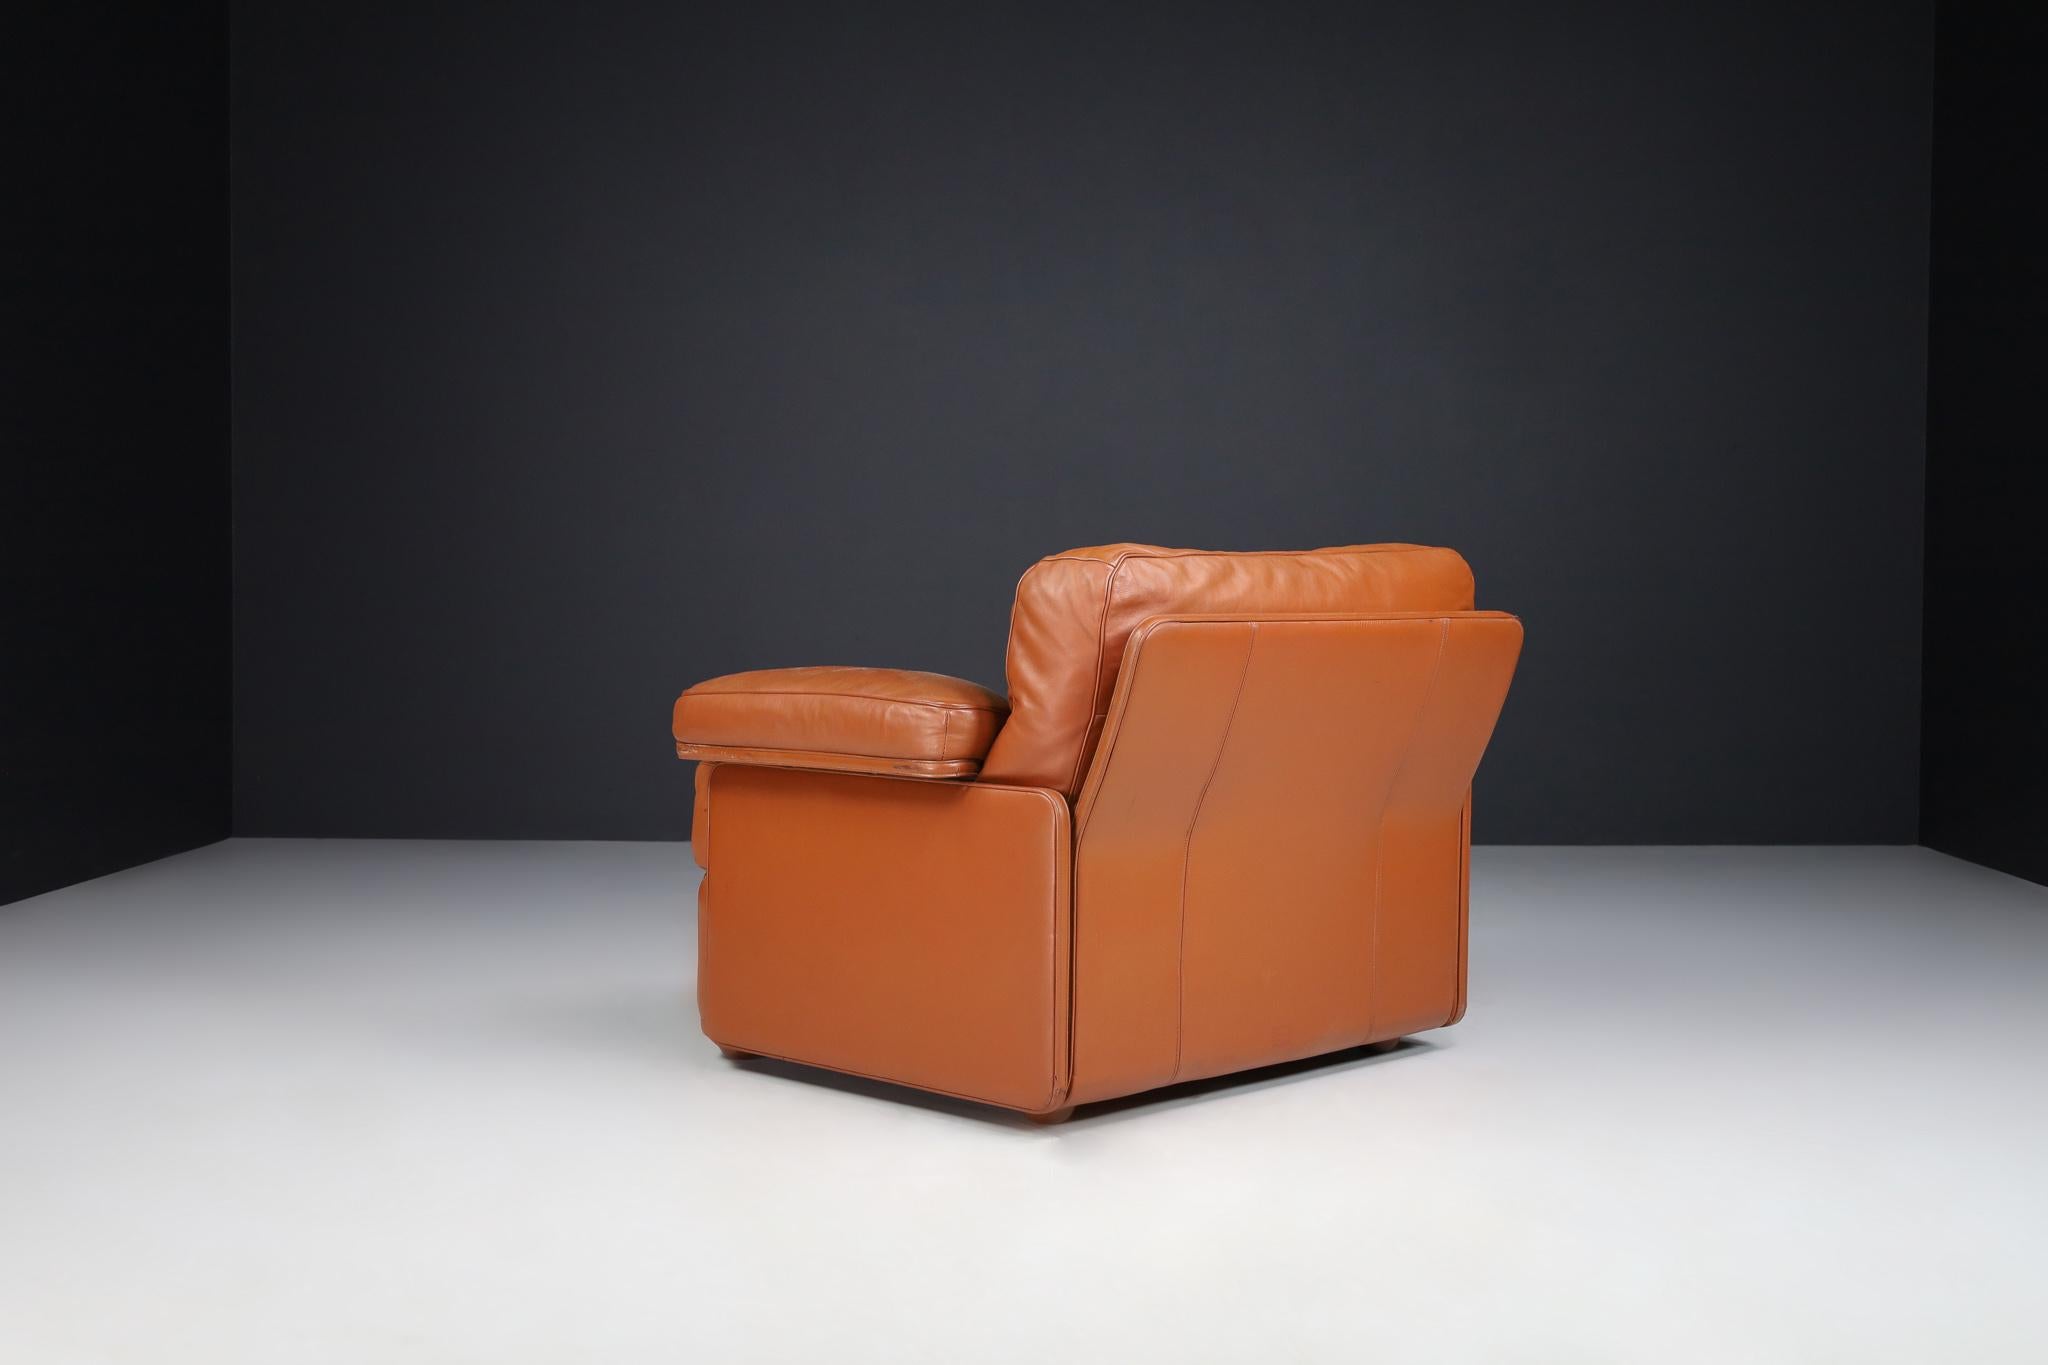 Tito Agnoli For Poltrona Frau Leather Lounge Chairs by, Italy 1970s For Sale 2